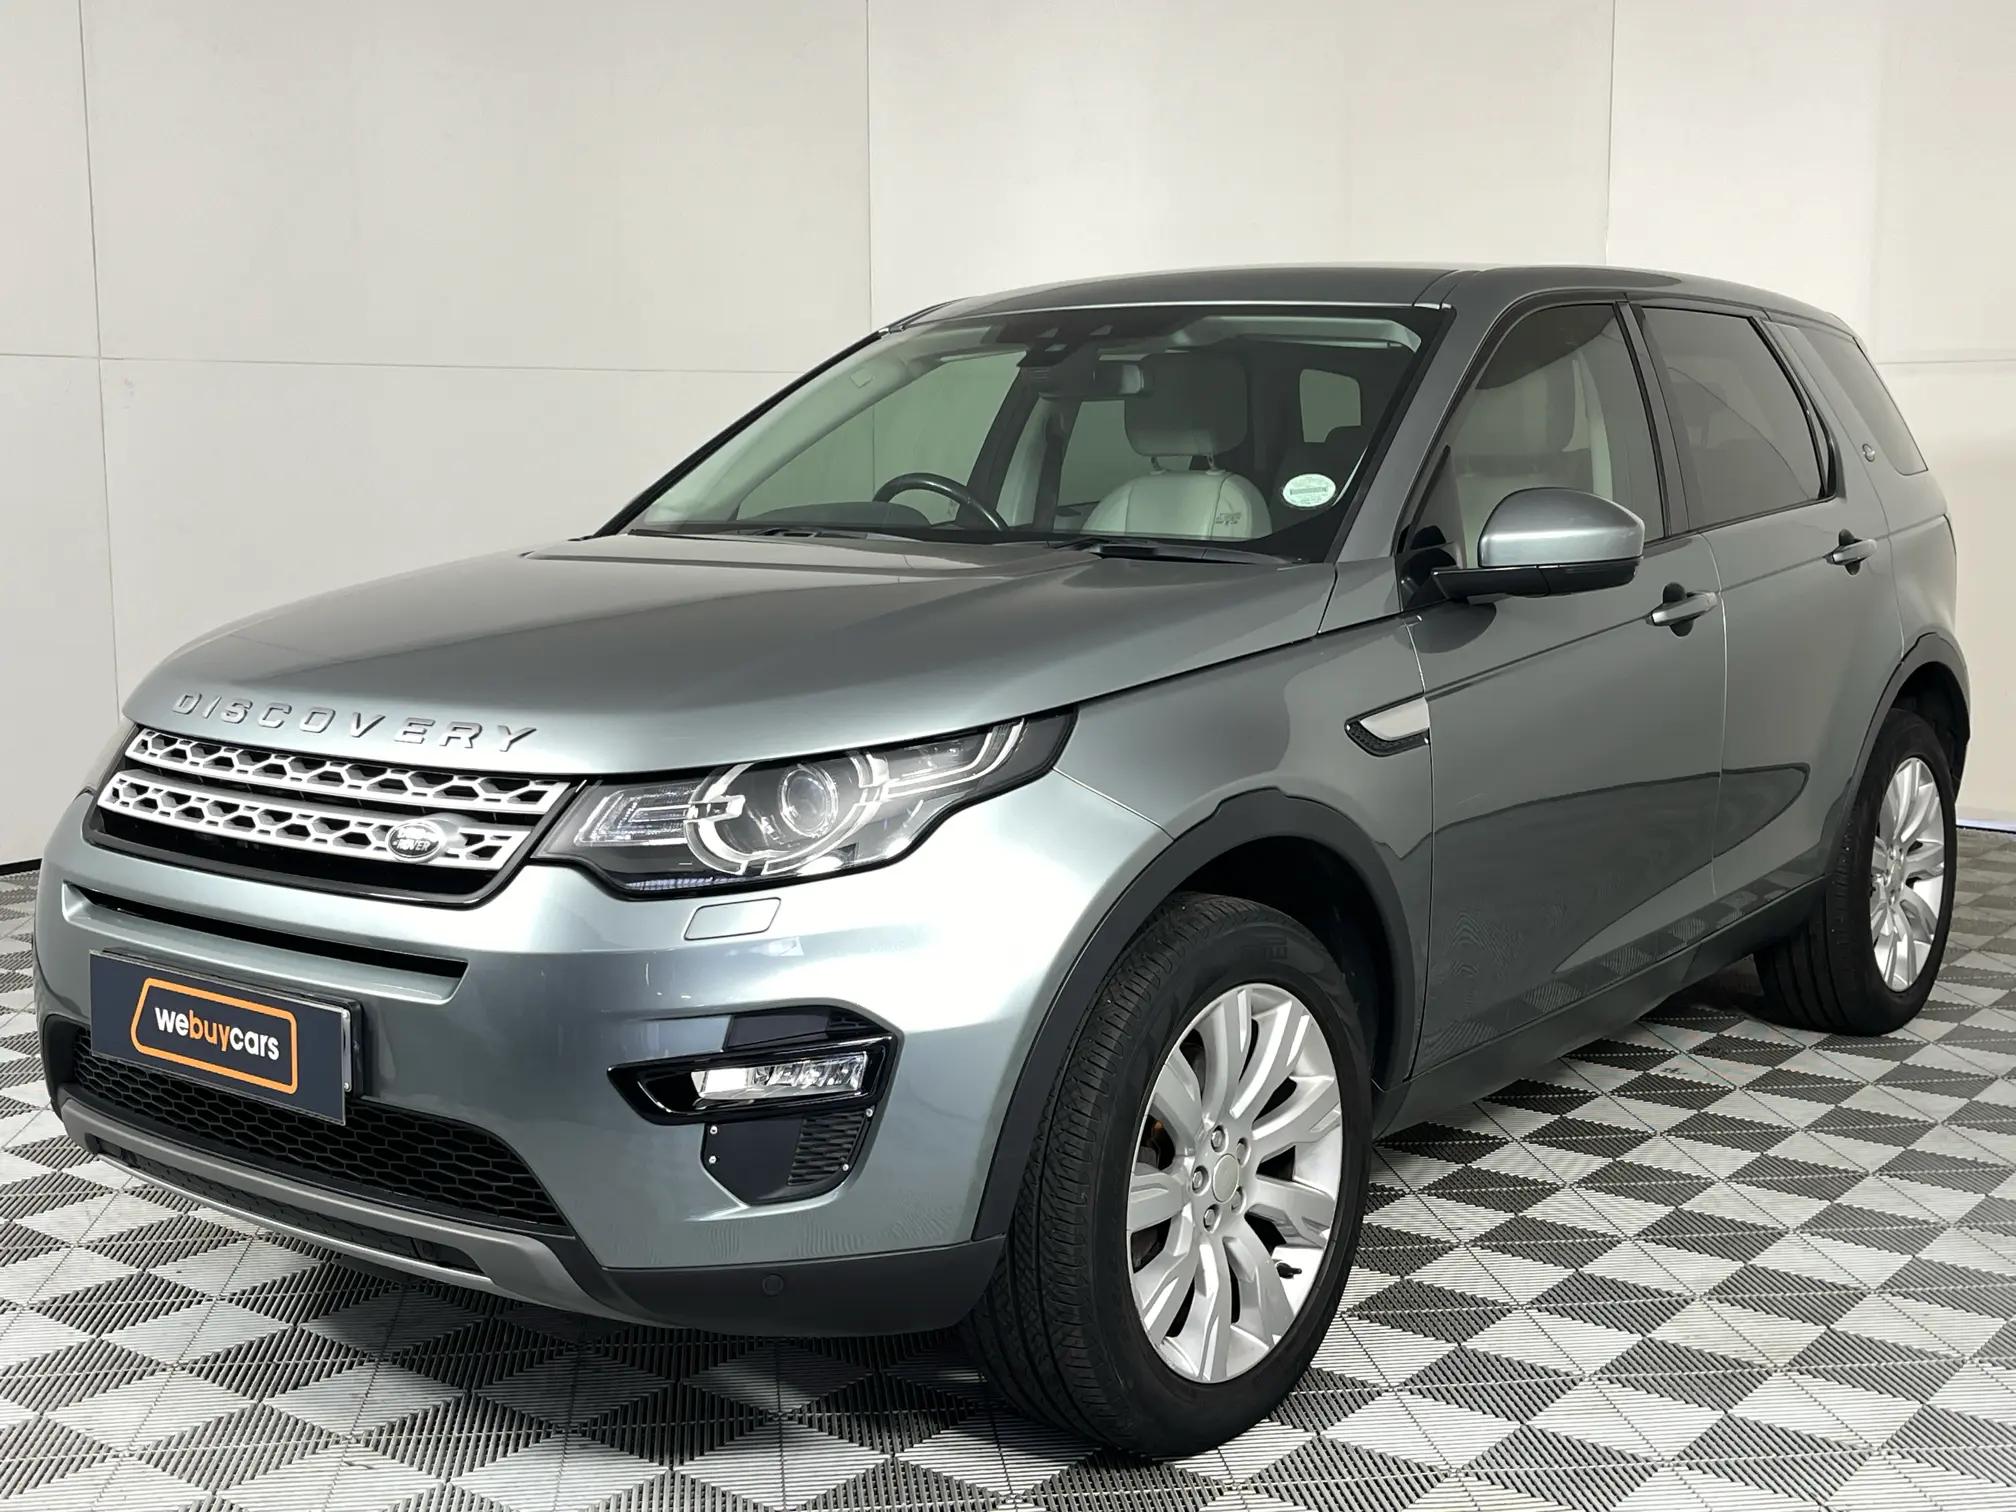 Land Rover Discovery Sport 2.2 (140 kW) TD 4 HSE